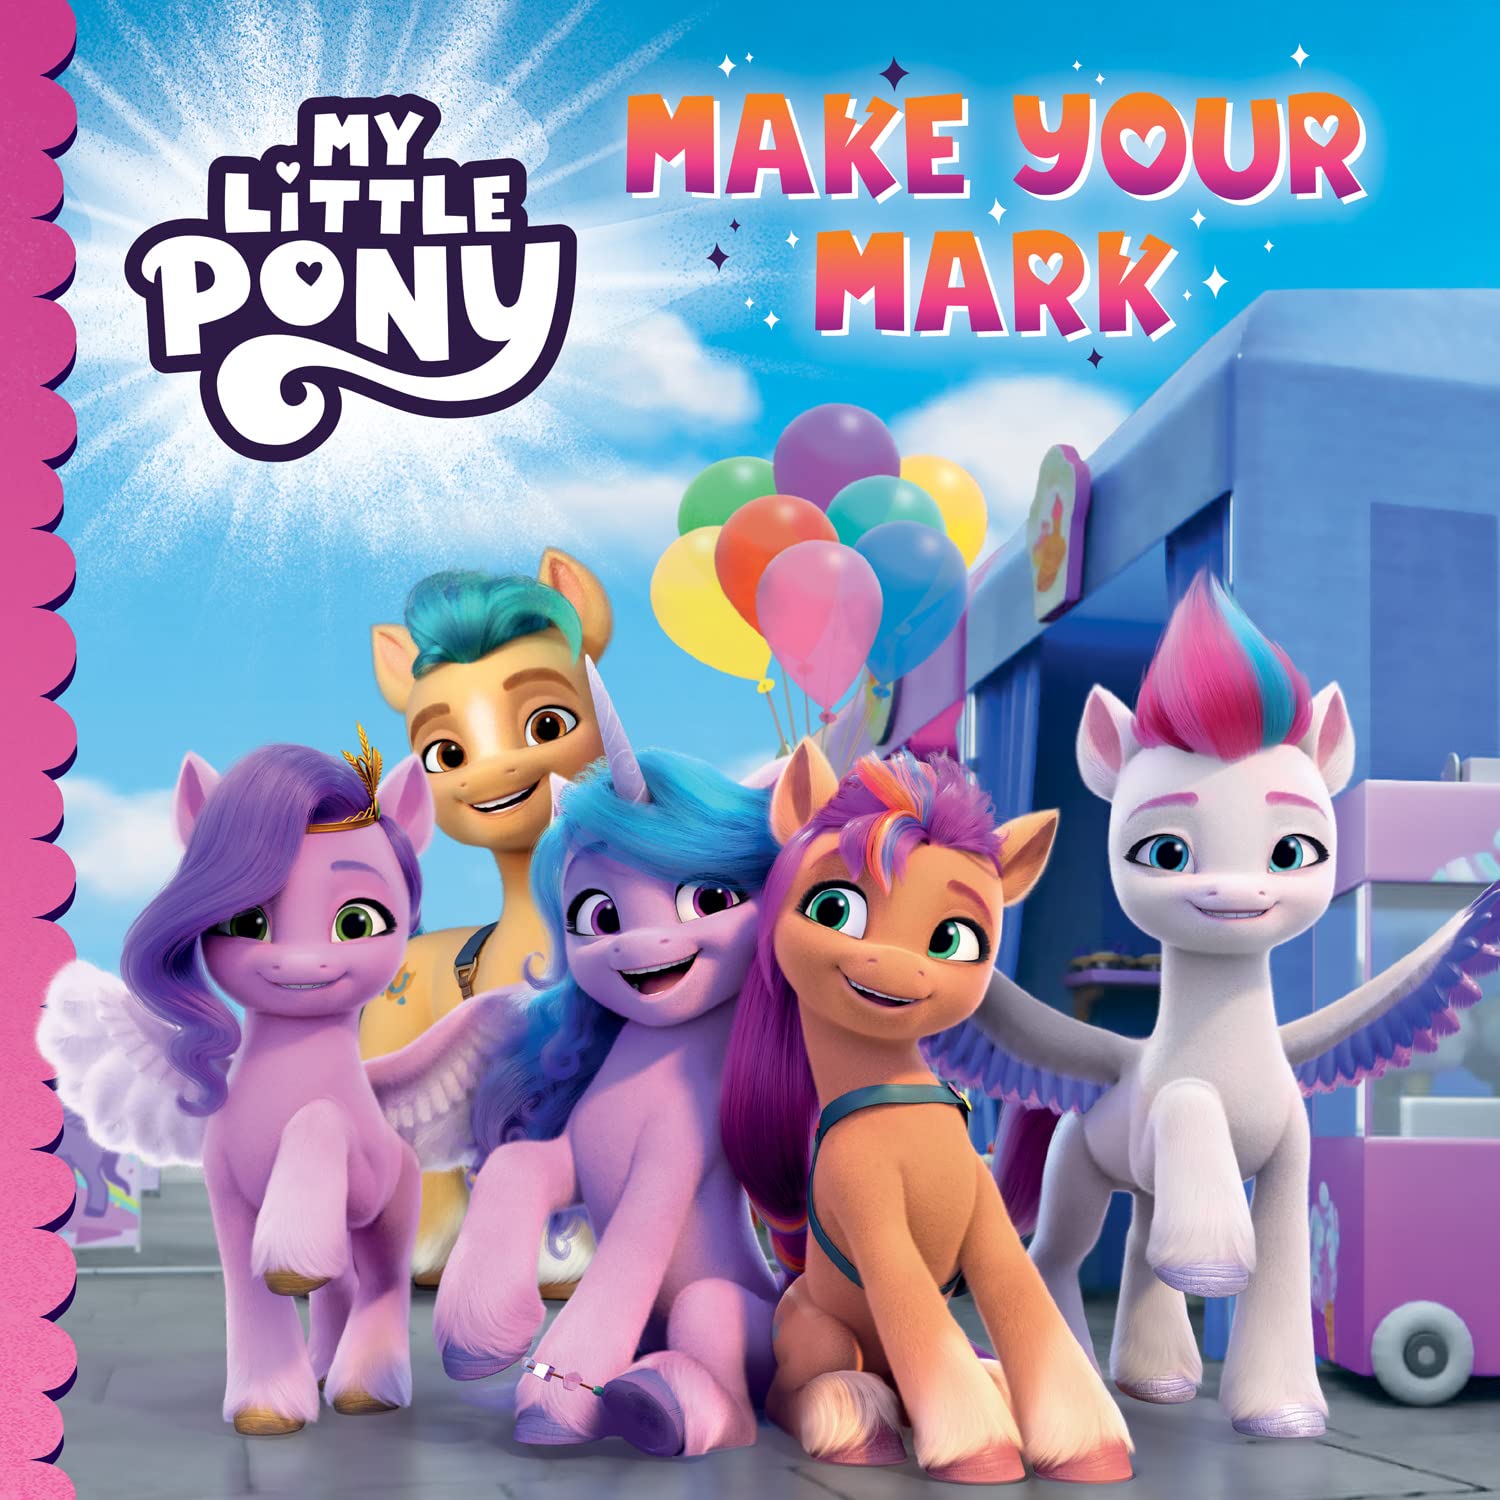 Equestria Daily MLP Stuff! My Little Pony Make Your Mark An